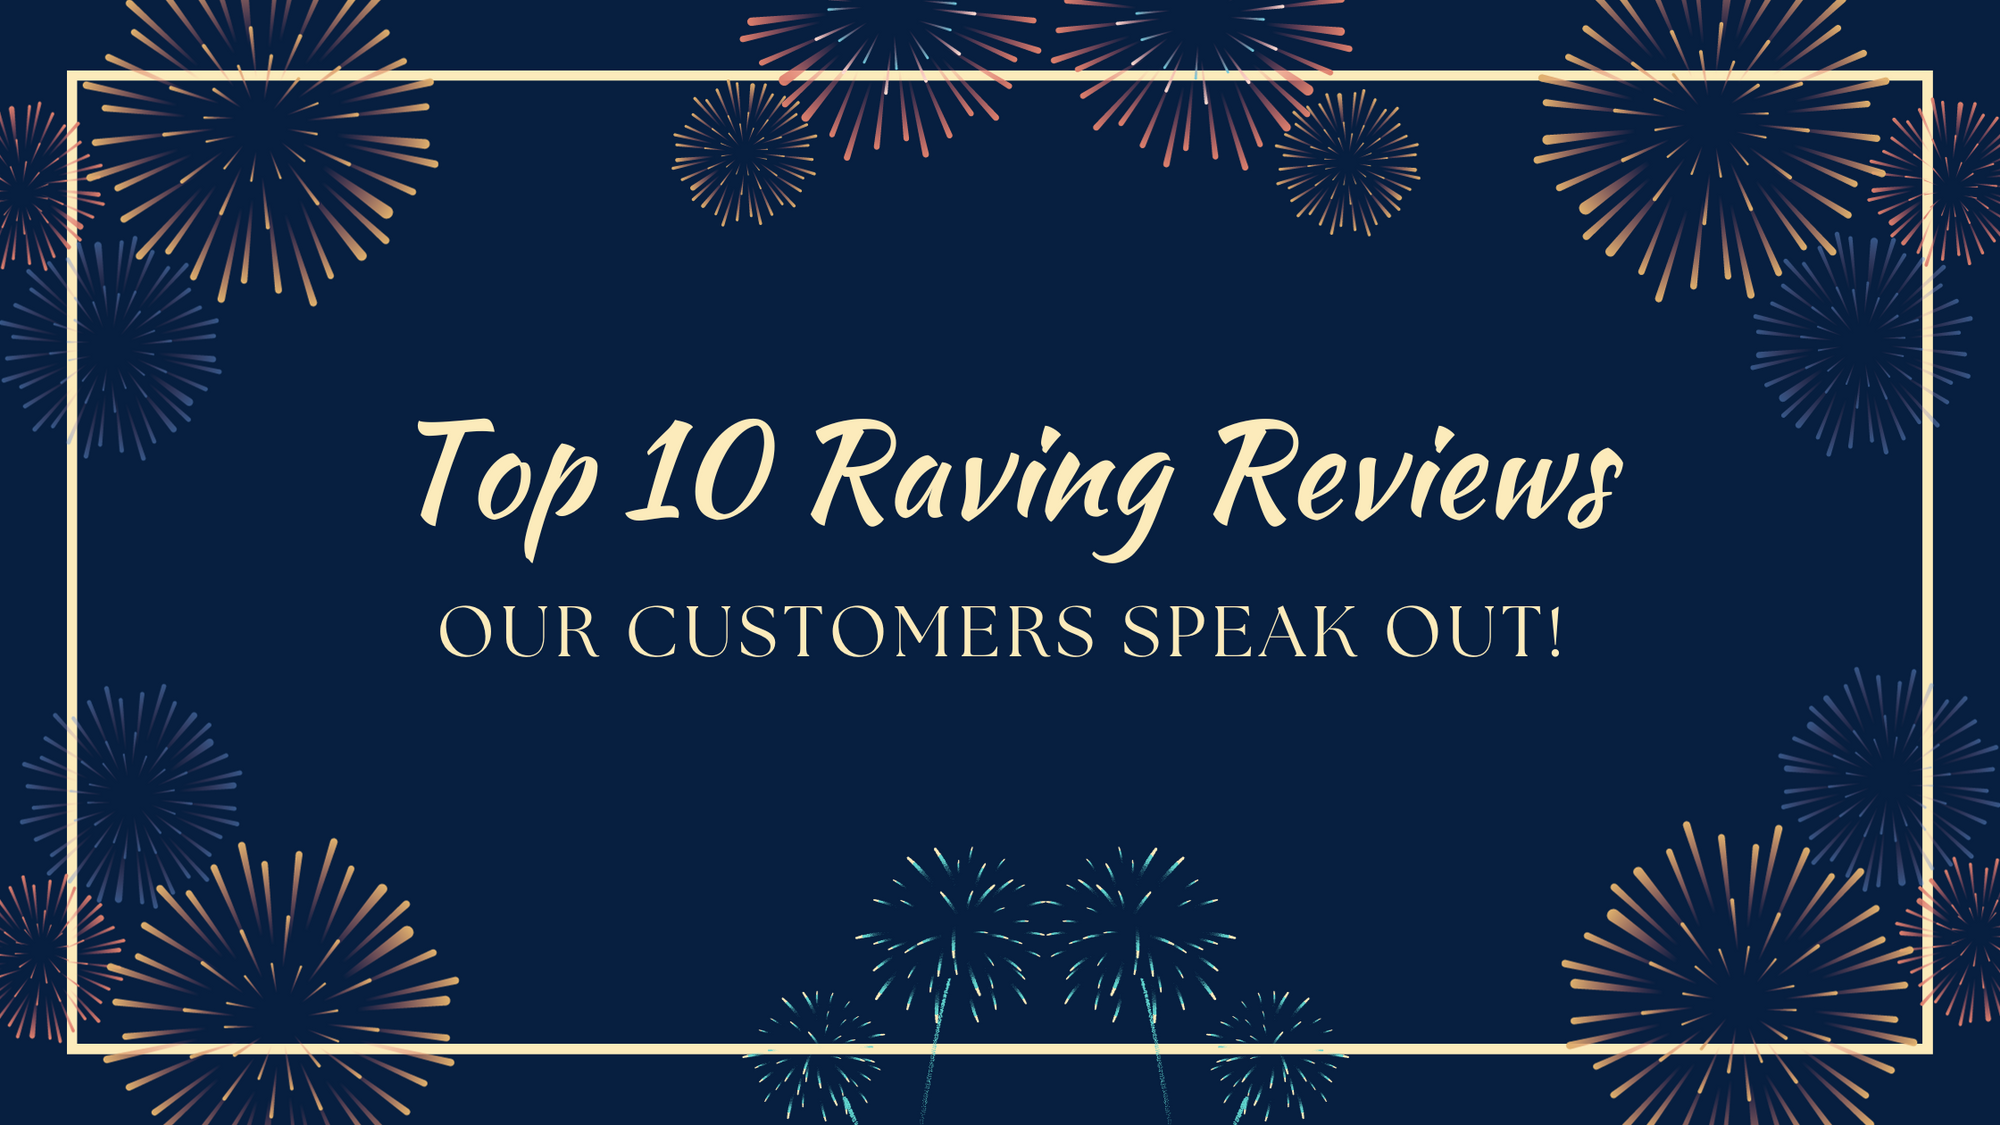 Top 10 Raving Reviews: Our Customers Speak Out! - December 31th